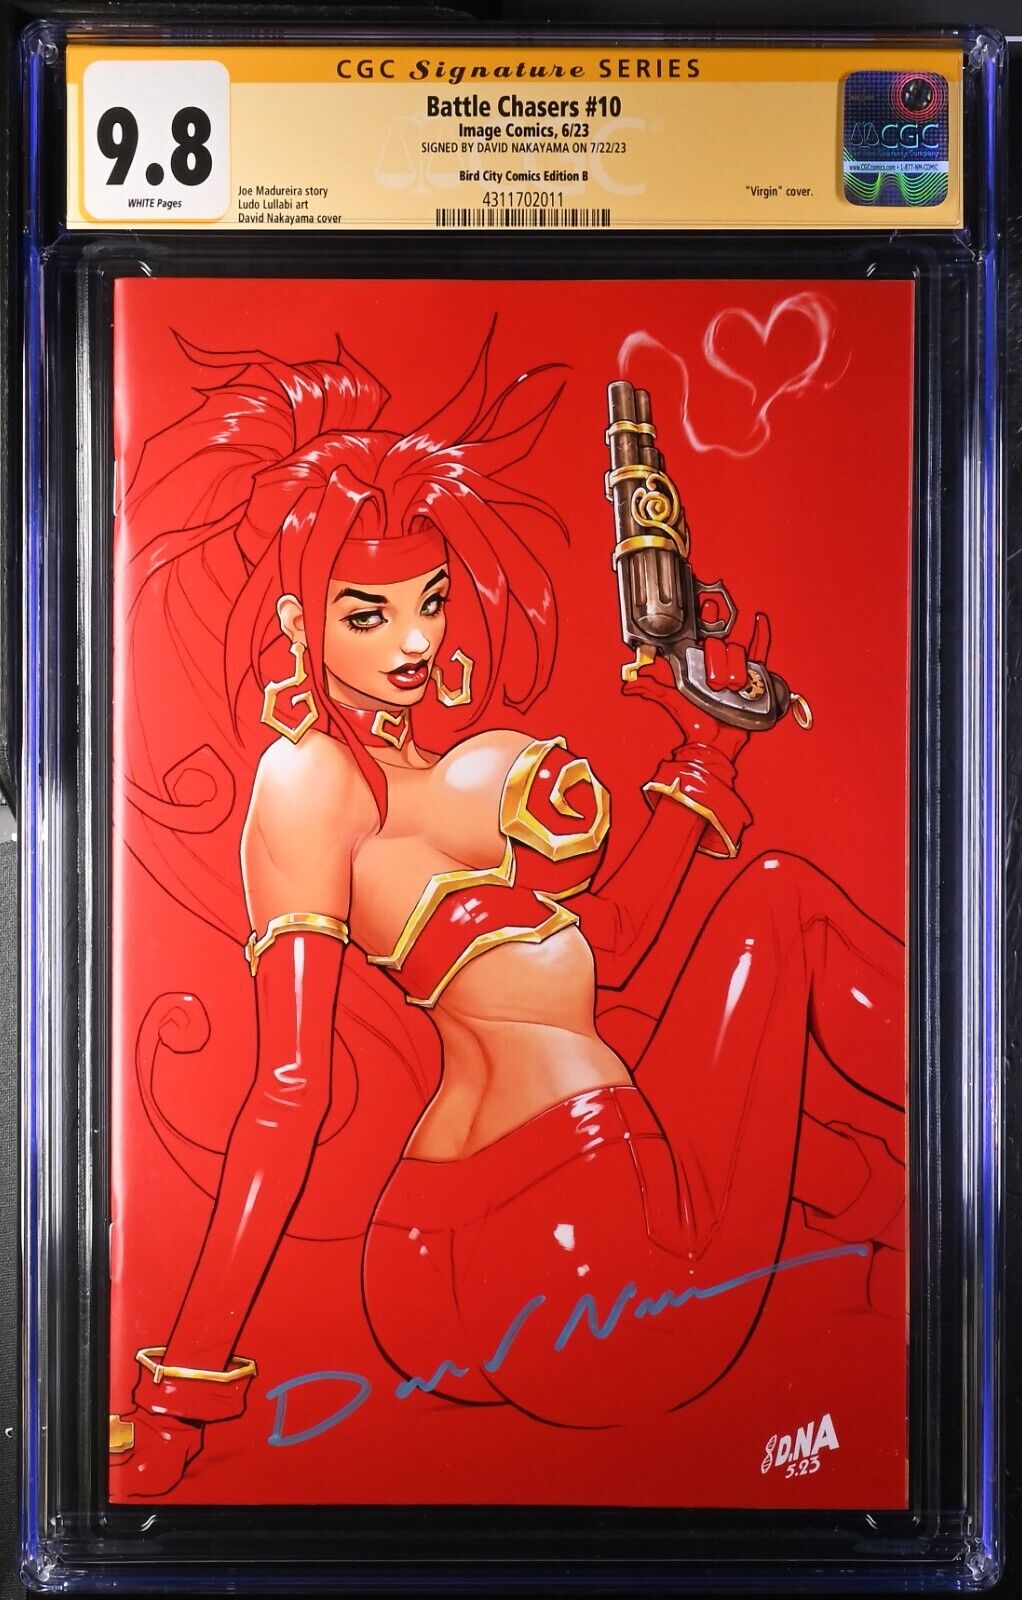 Battle Chasers #10 CGC SS 9.8 Virgin Cover Signed Nakayama Bird City Exclusive